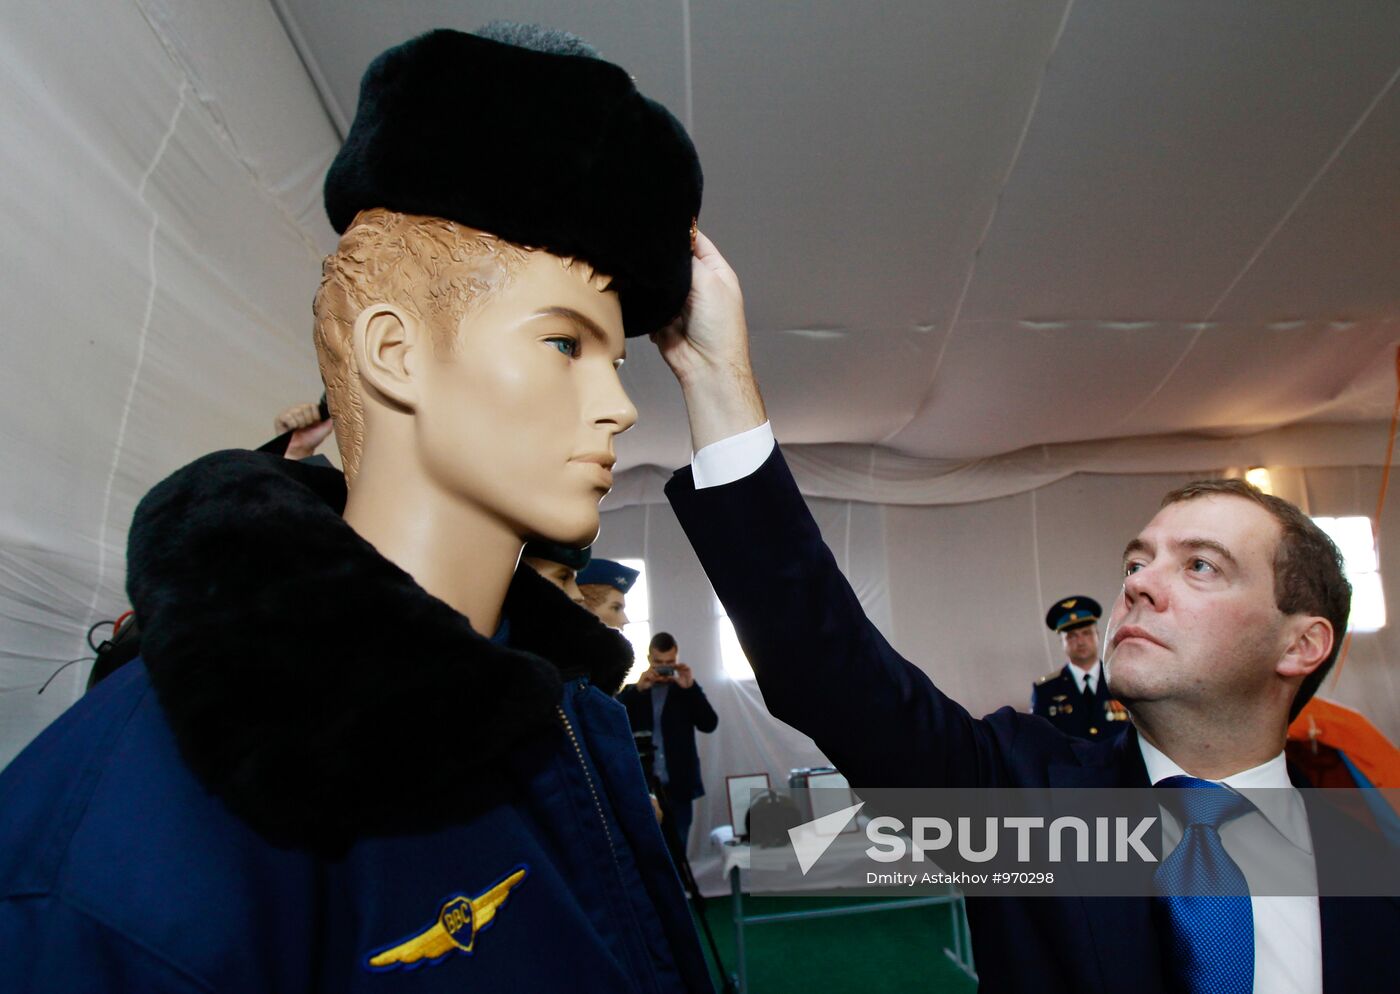 Dmitry Medvedev's working visit to Southern Federal District